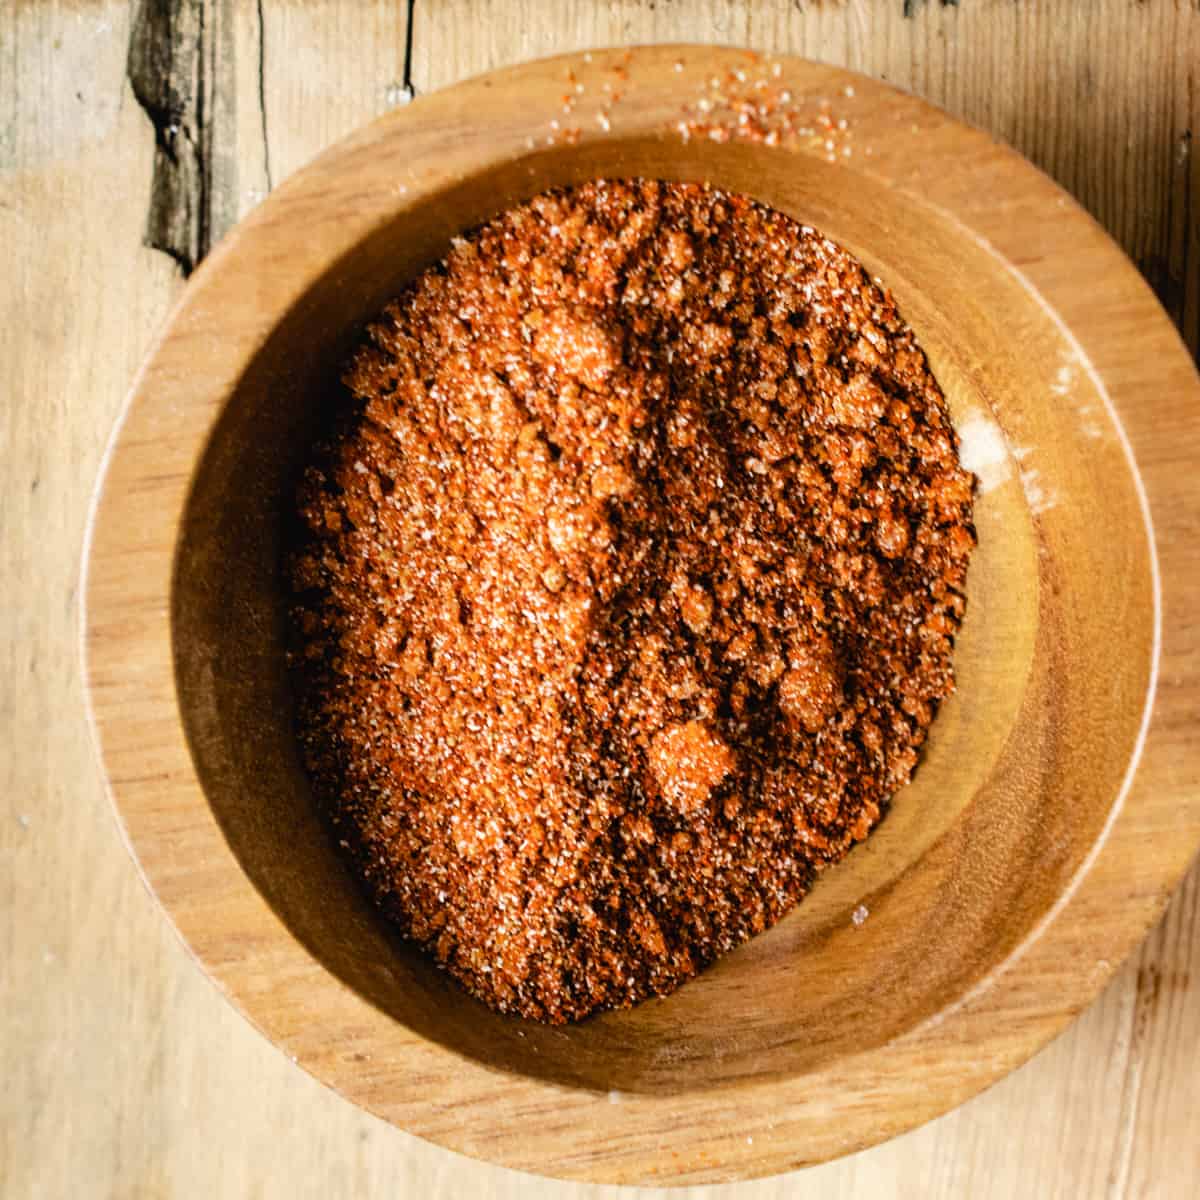 Wooden bowl of chili seasoning mixed up on a wooden cutting board.